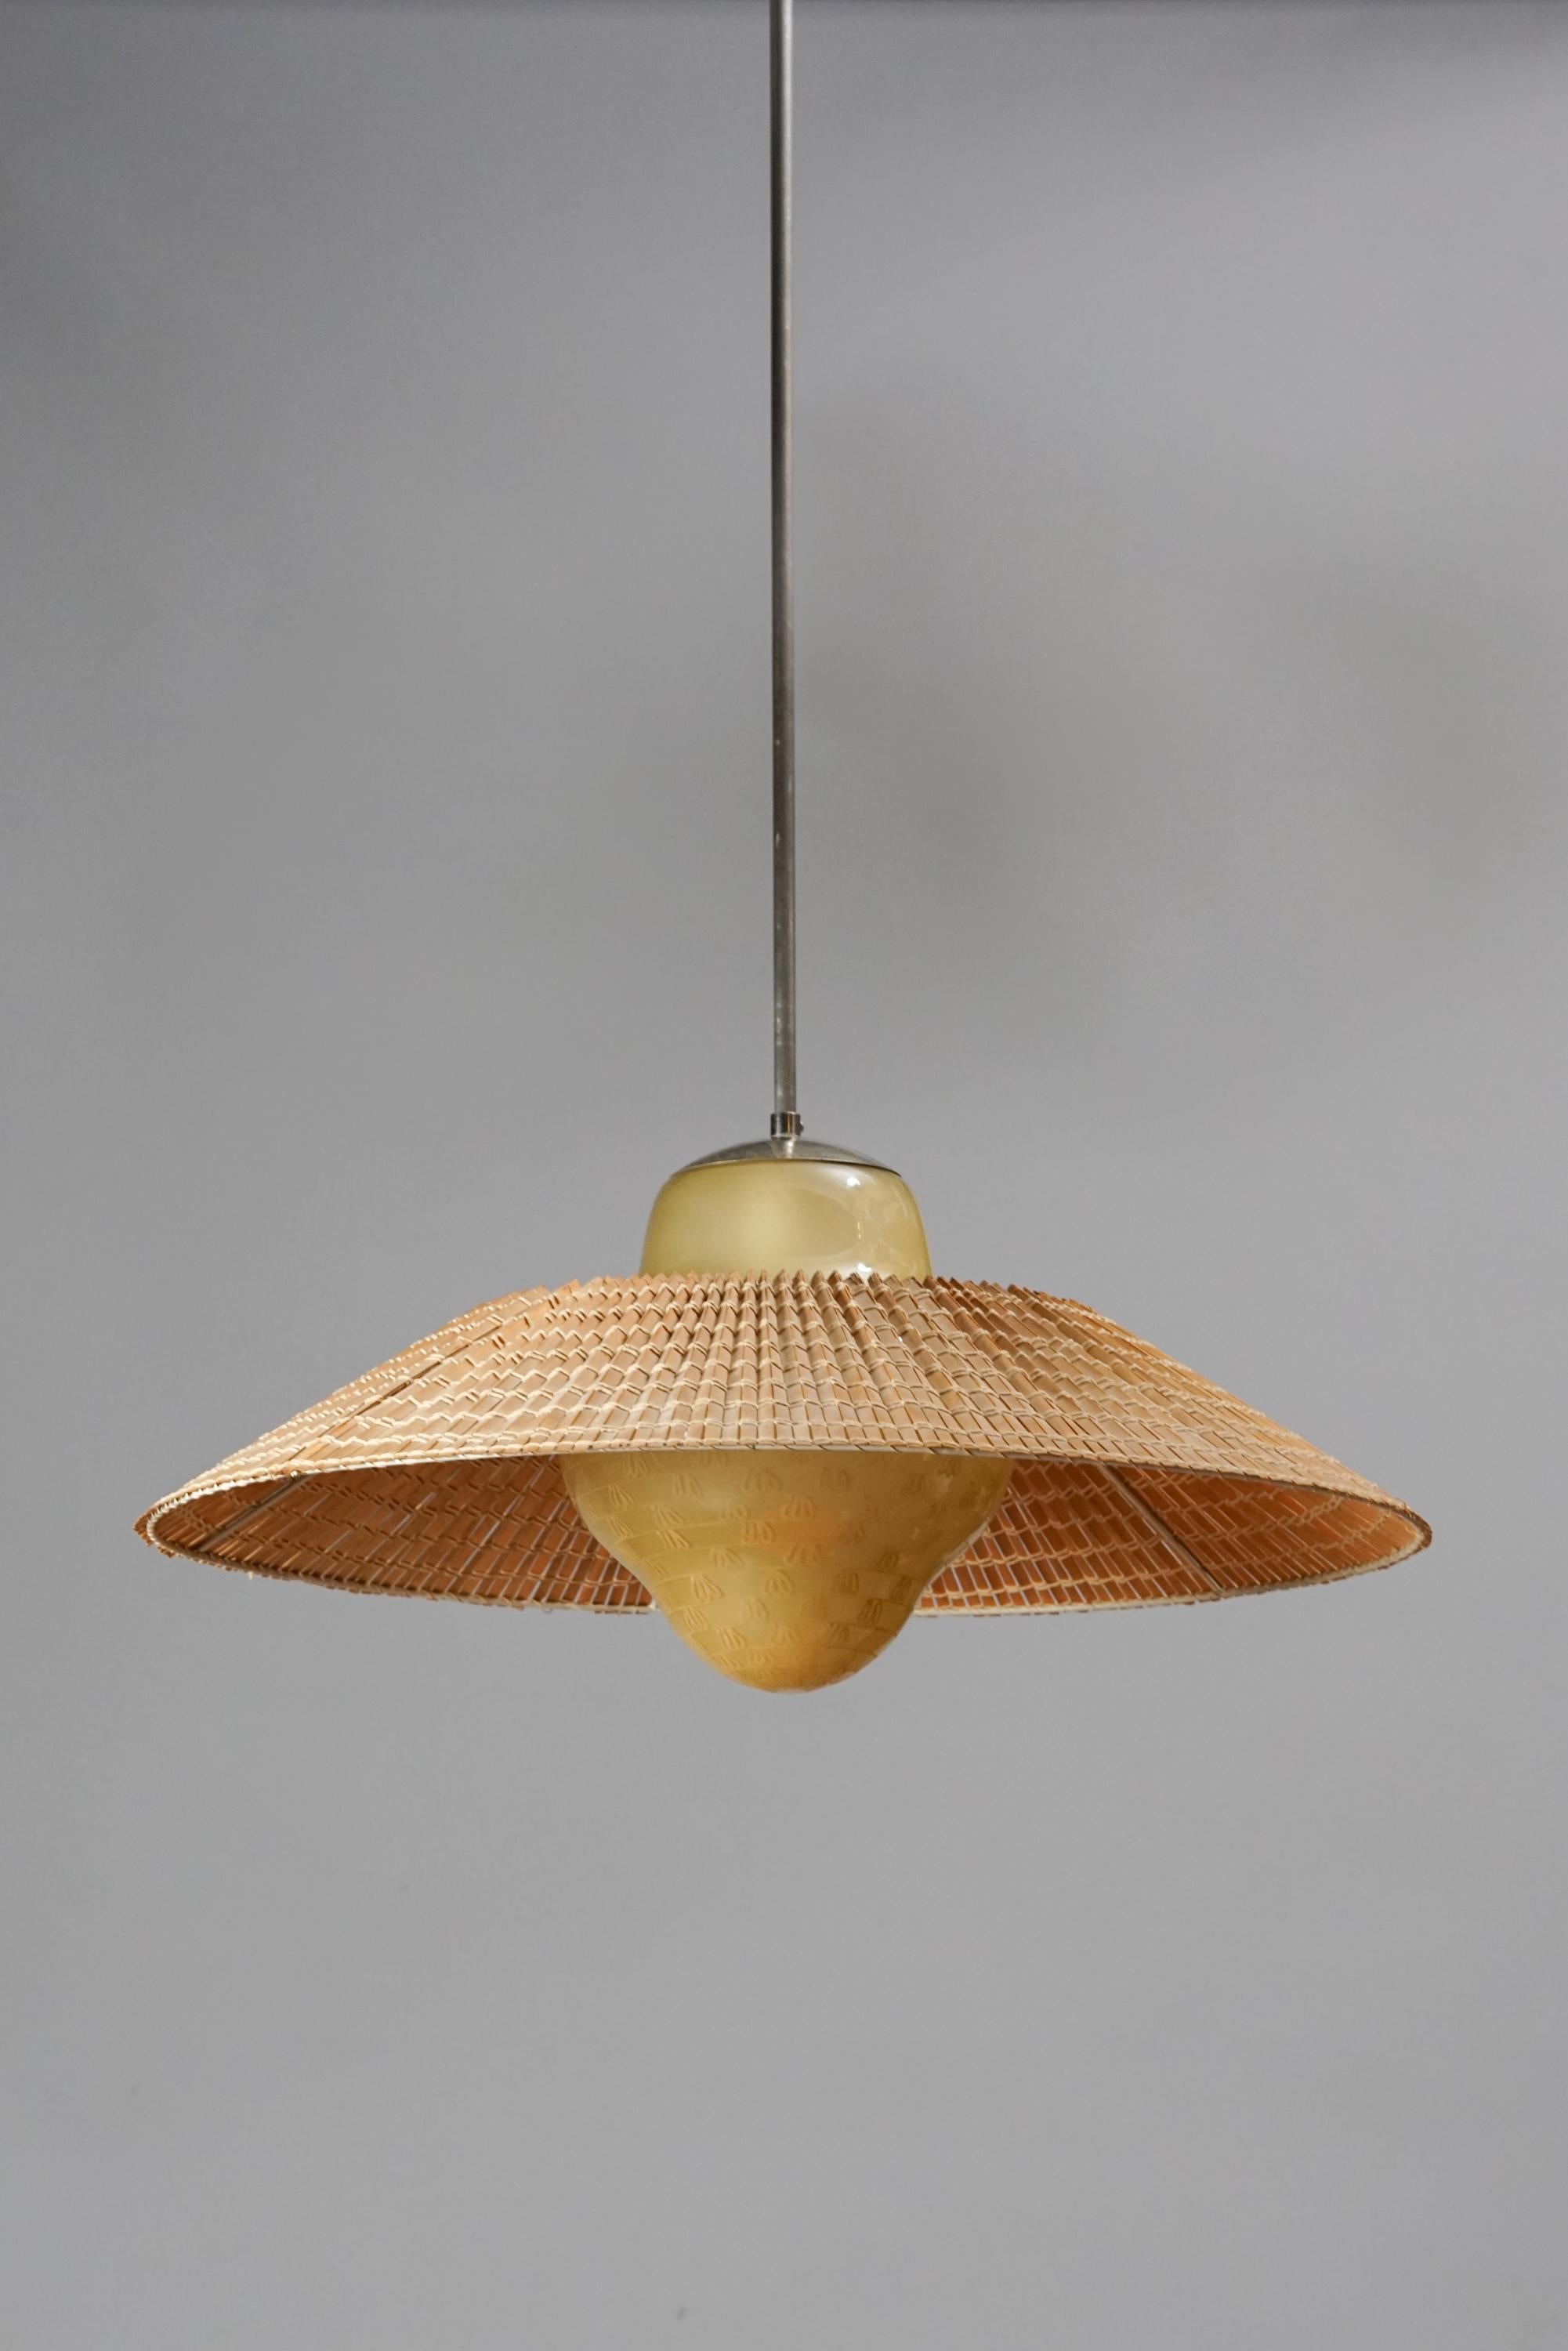 Rare hand painted ceiling lamp model 1032 by Gunilla Jung, for Orno Finland in the 1940s. Hand painted opaline glass with rattan shade, good vintage condition. Rare model. Manufacturers stamp.